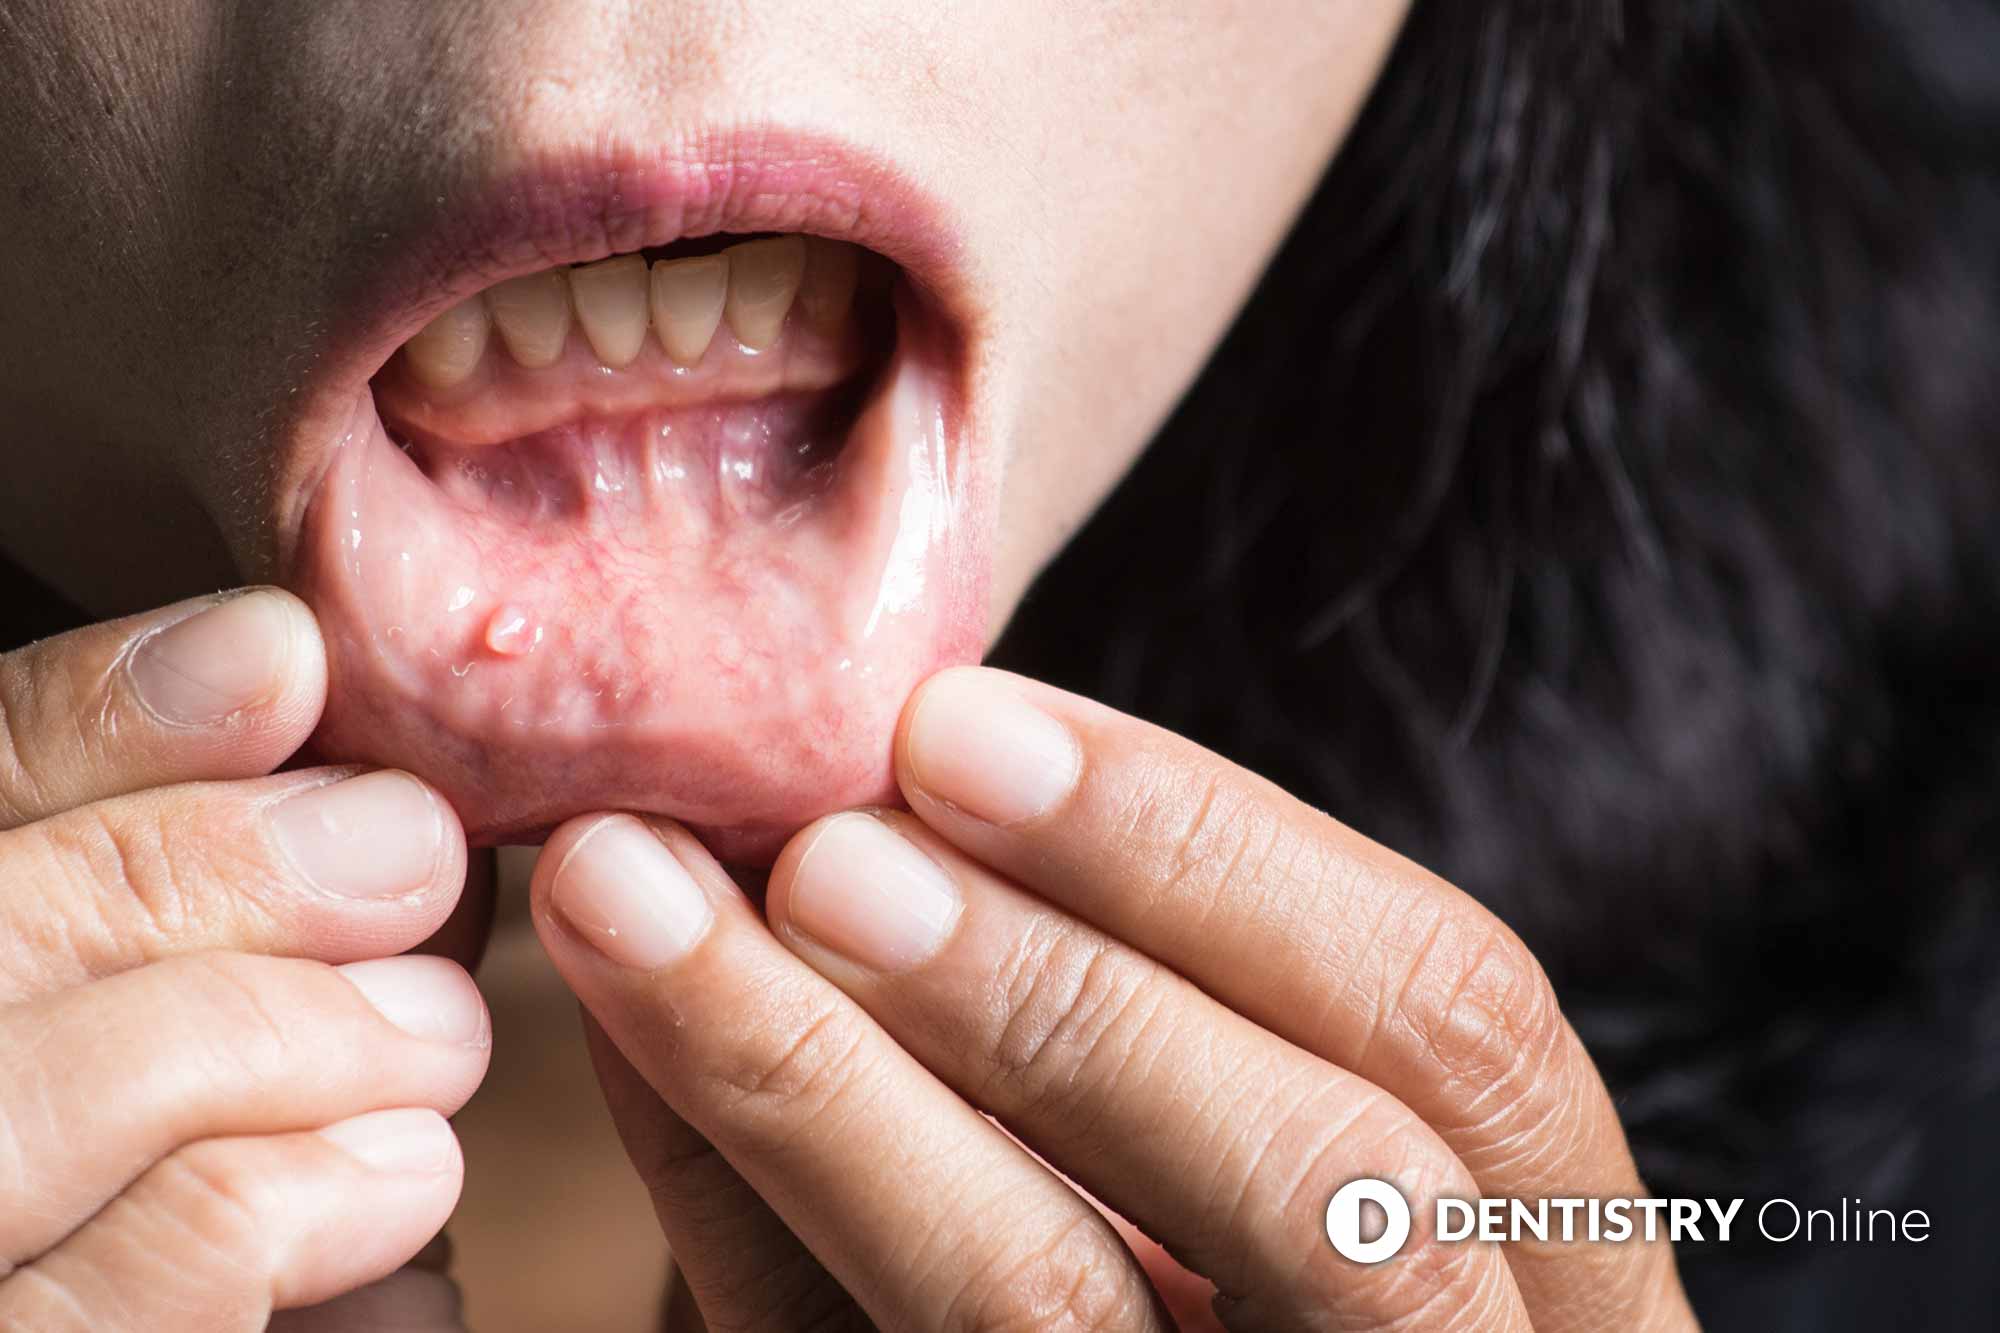 A leading consultant has seen an increase in signs of mouth cancer due to early signs being missed due to the pandemic